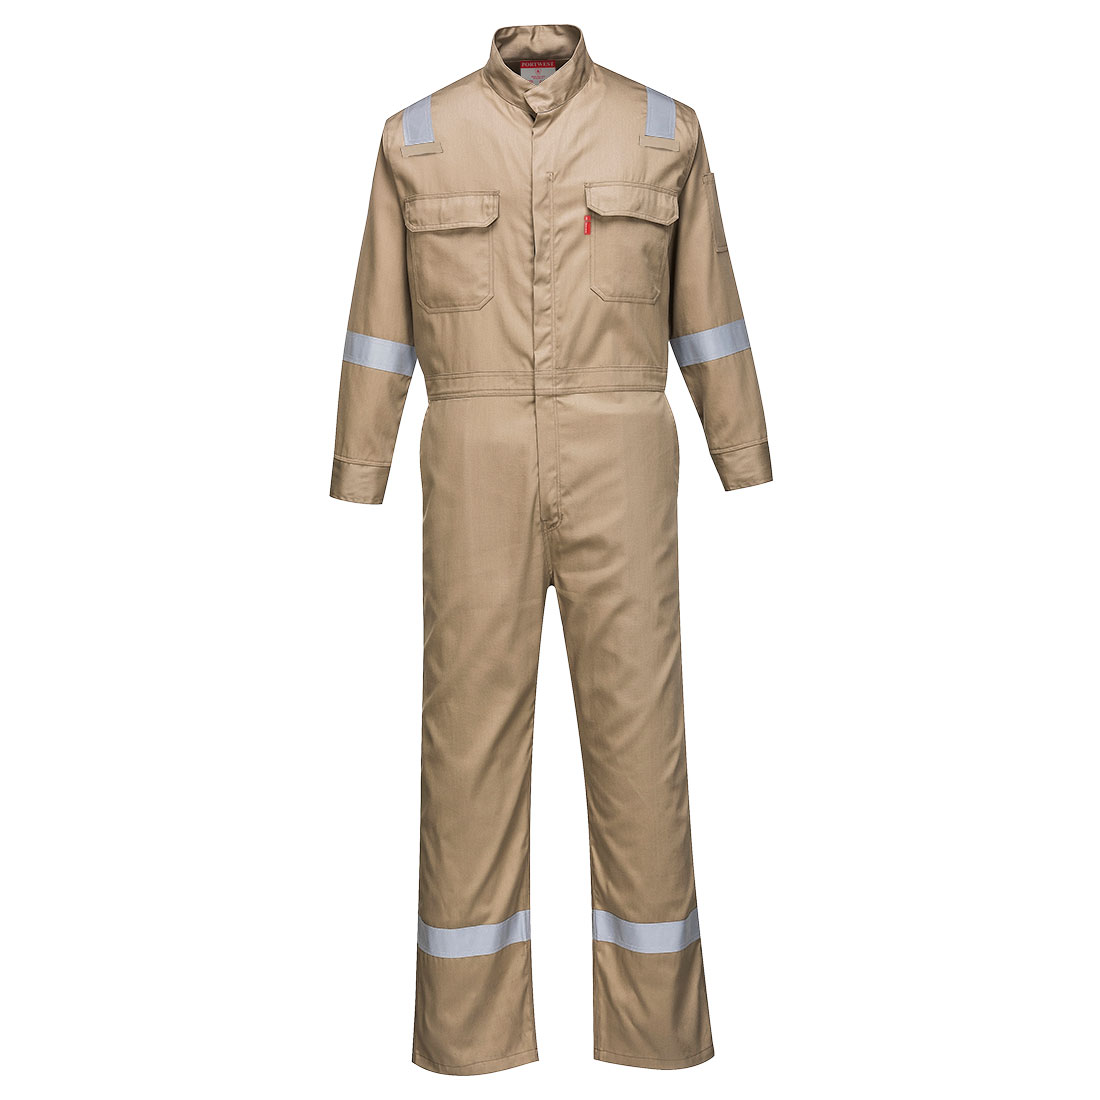 Vaultex 100% Cotton Coverall With Reflective